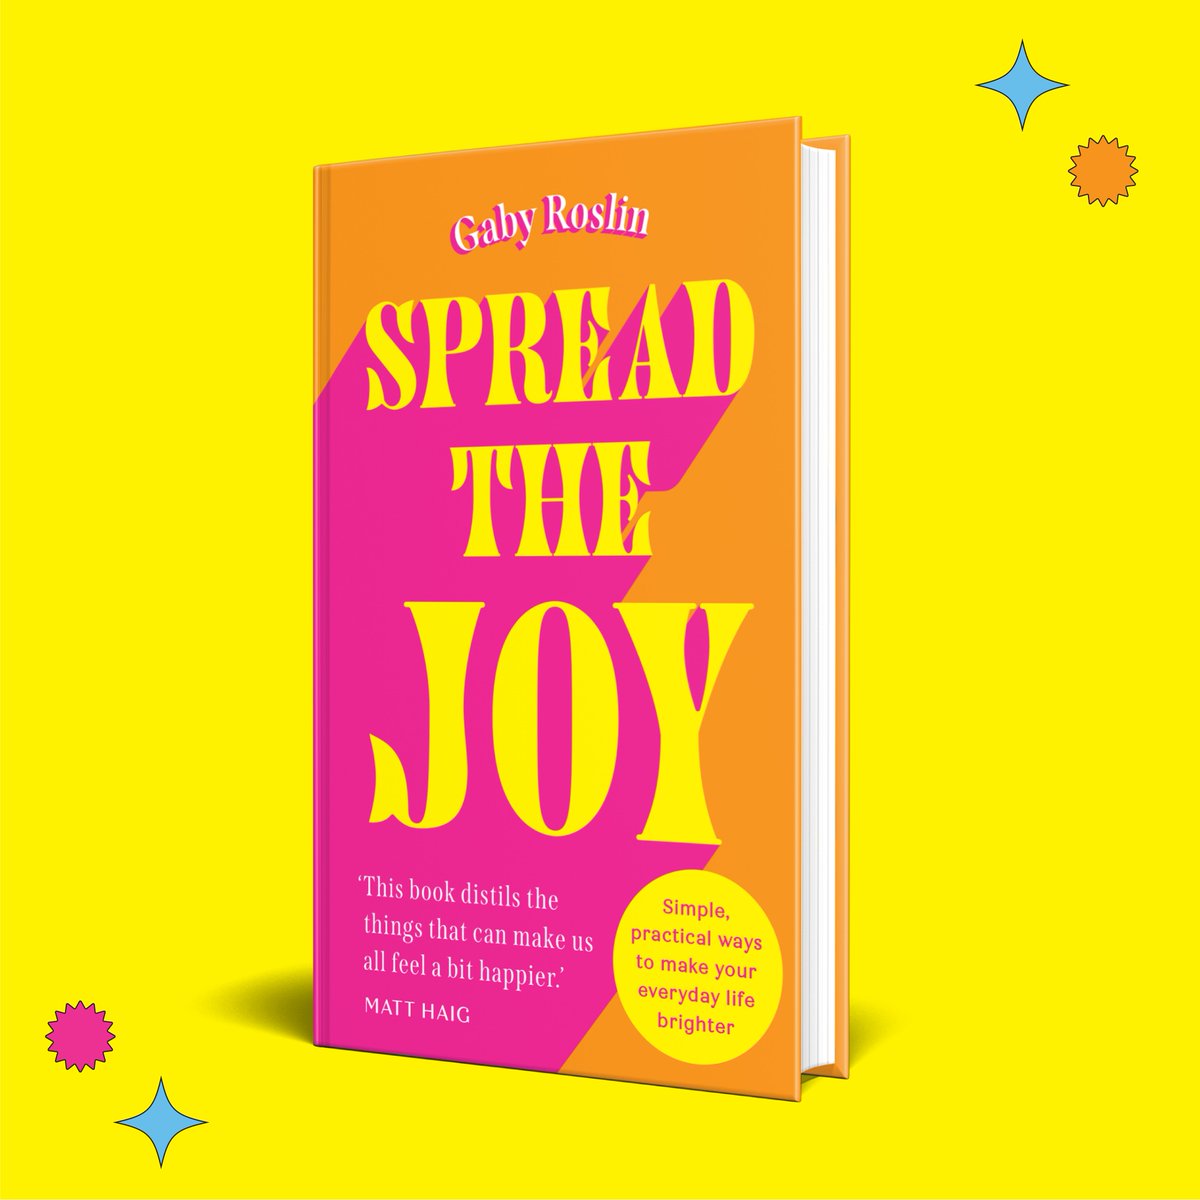 Make your everyday life brighter with #SpreadTheJoy by @GabyRoslin! Packed with heart-warming stories, charming illustrations, hilarious anecdotes, as well as practical tips and tricks, this book is full of positivity! 🧡💛 Out now: shorturl.at/mpL08